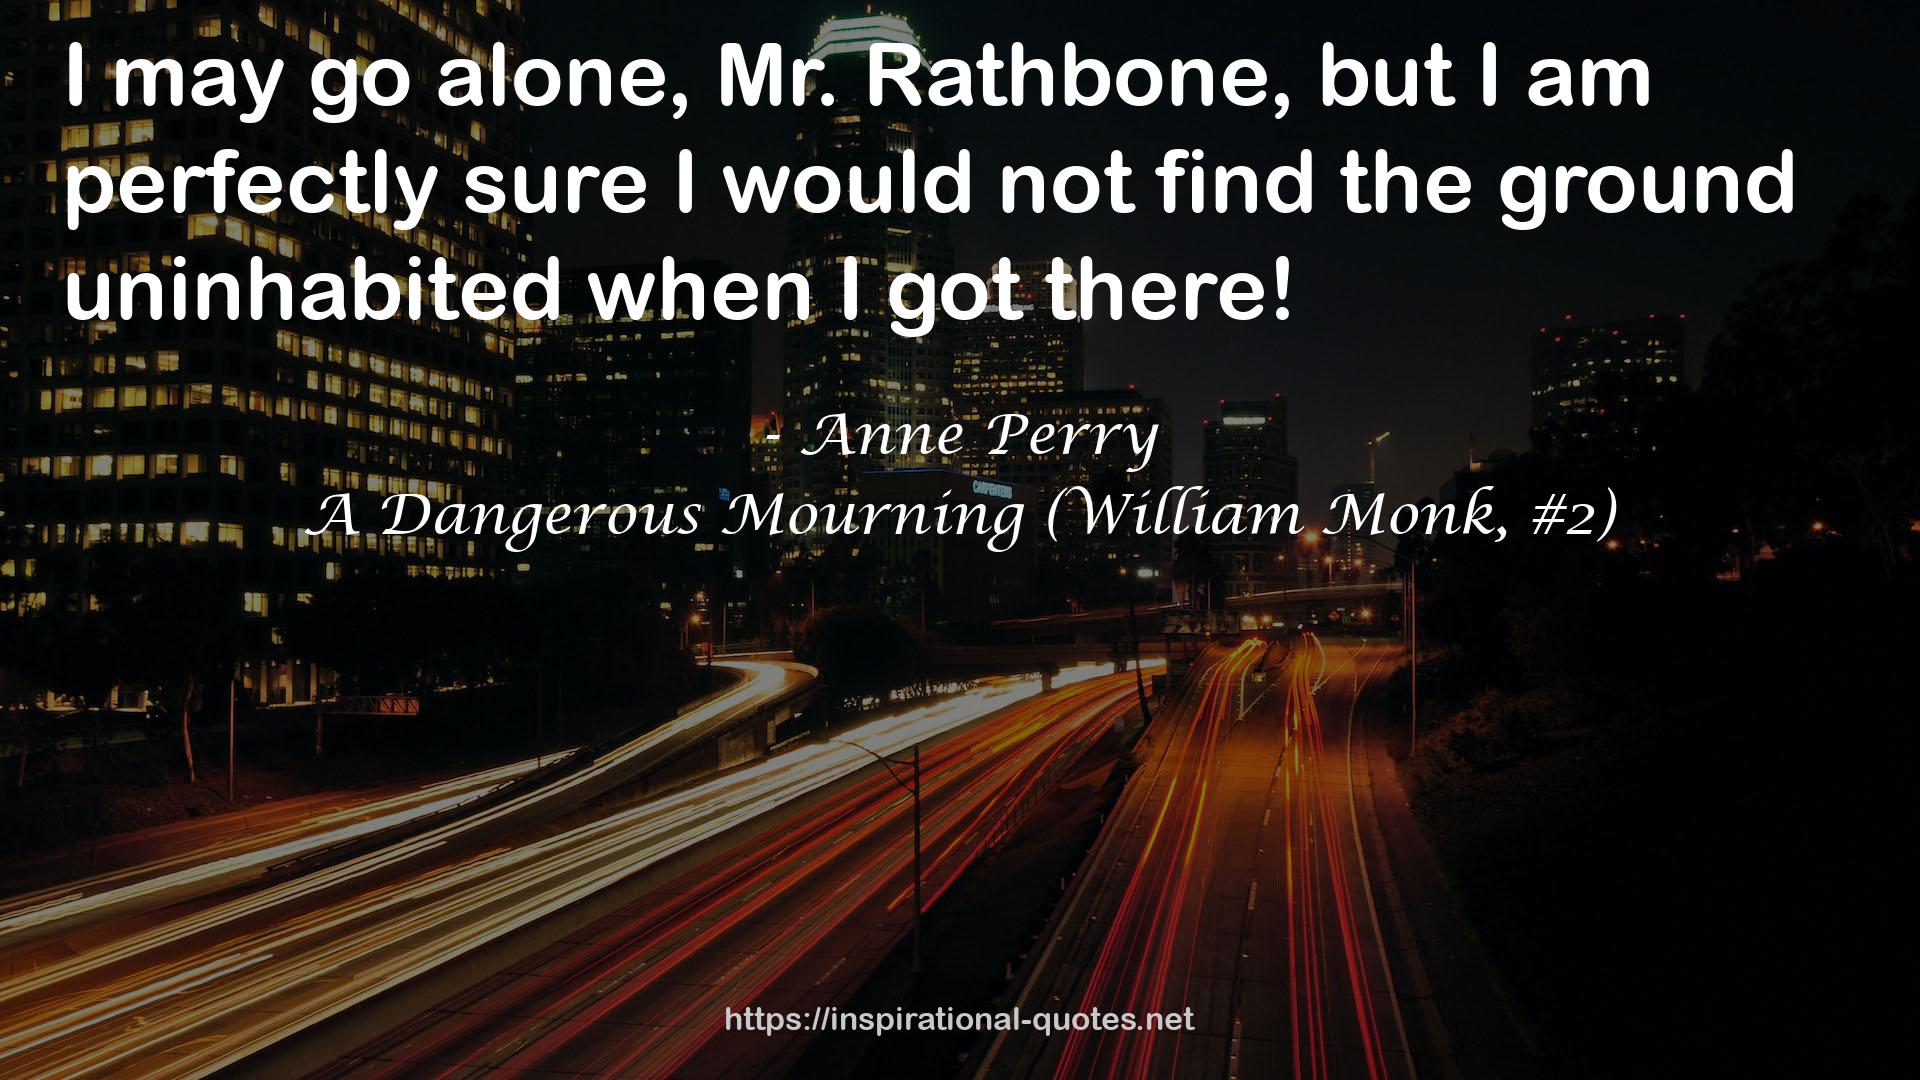 A Dangerous Mourning (William Monk, #2) QUOTES